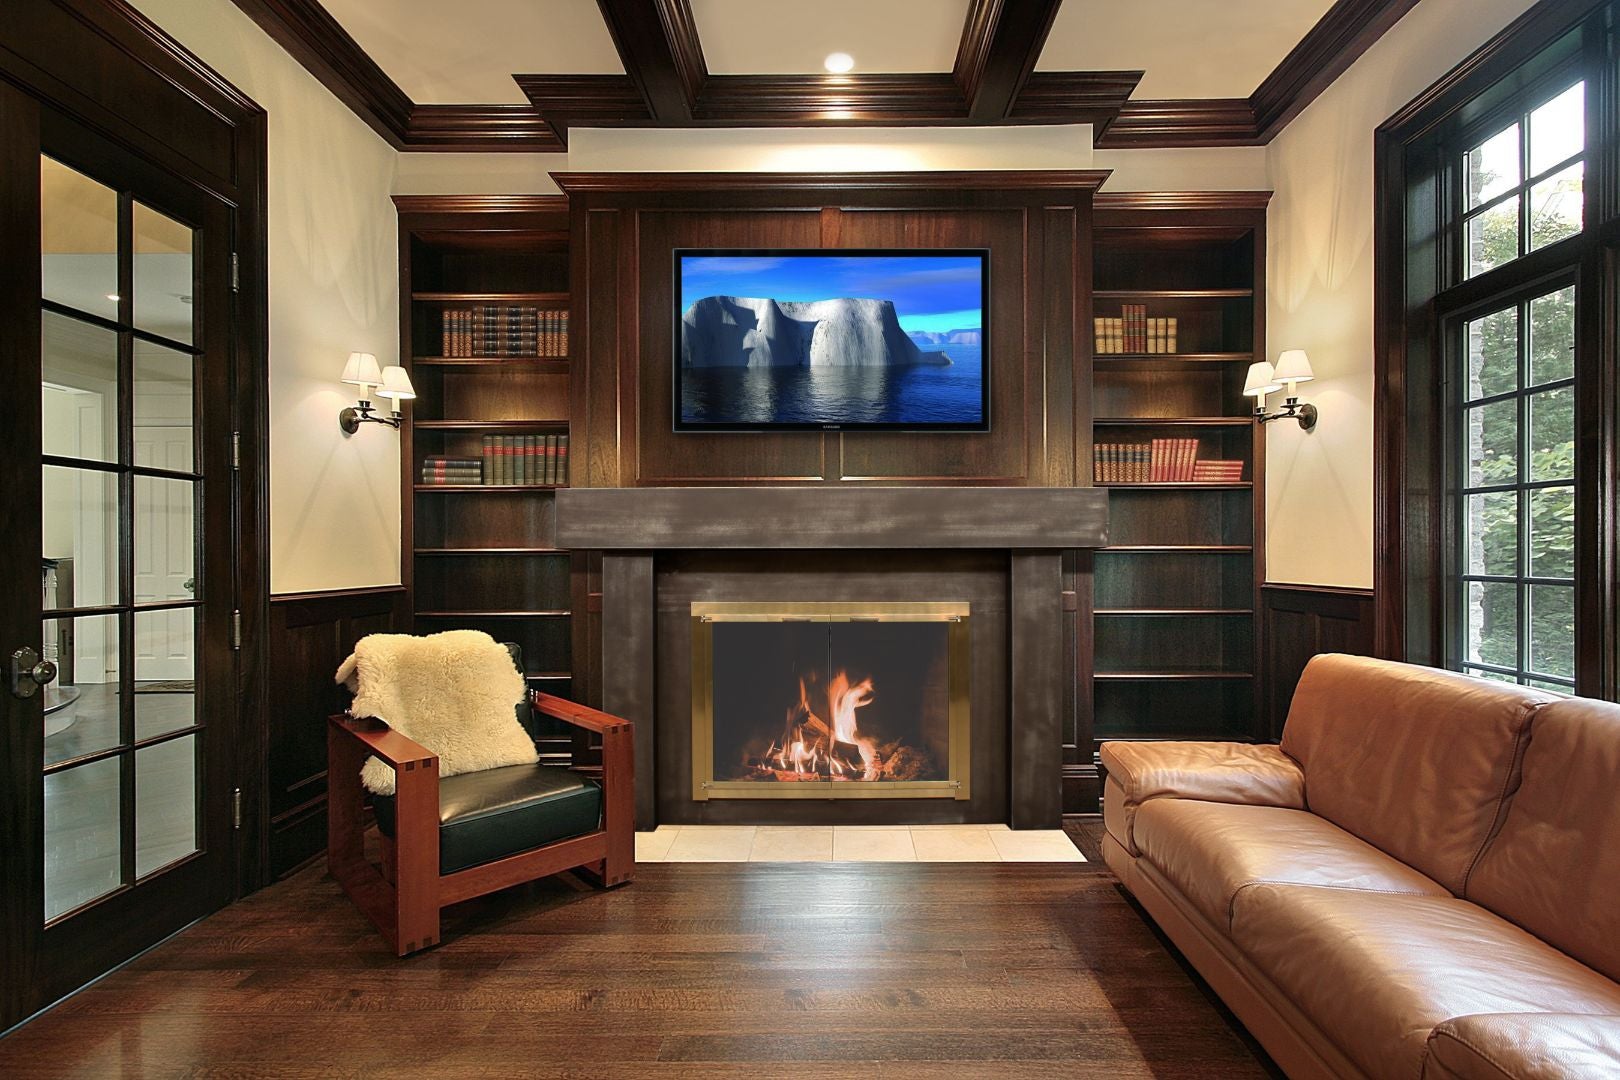 WilliamSmith Fireplaces Stoll Industries Shelves and Mantels